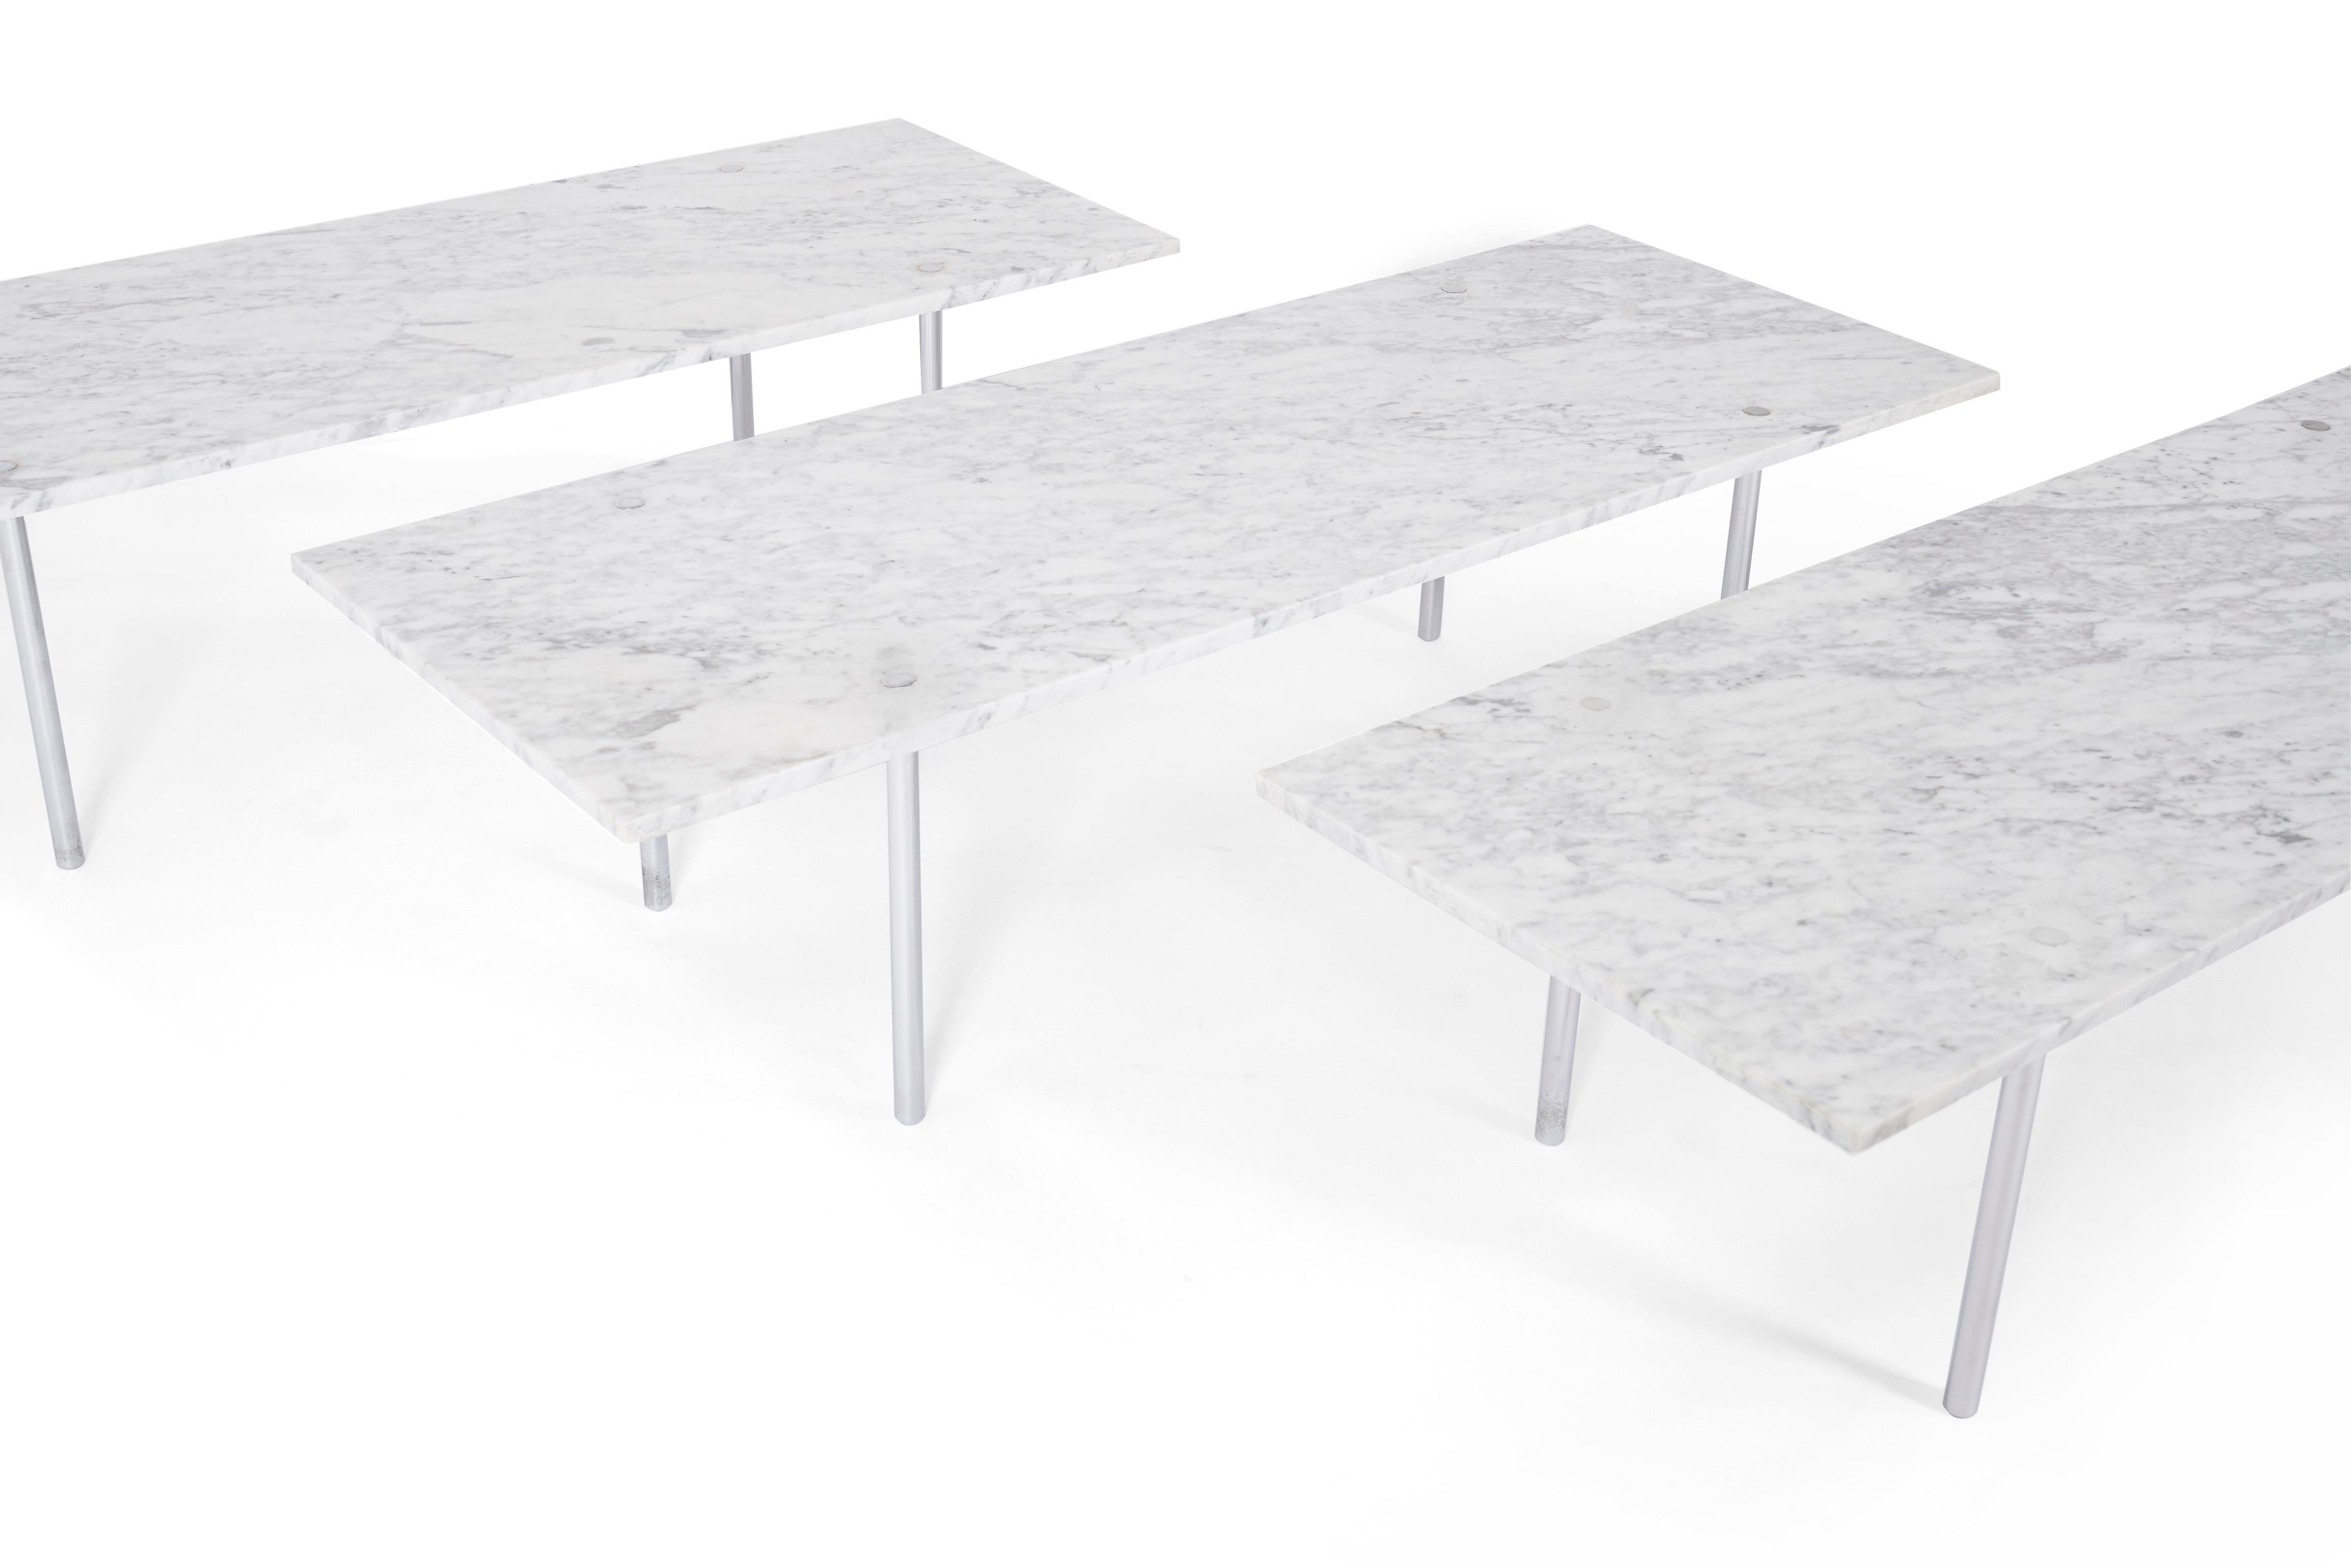 American Laverne Marble Coffee Table by William Katavolos, Ross Littell & Douglas Kelly